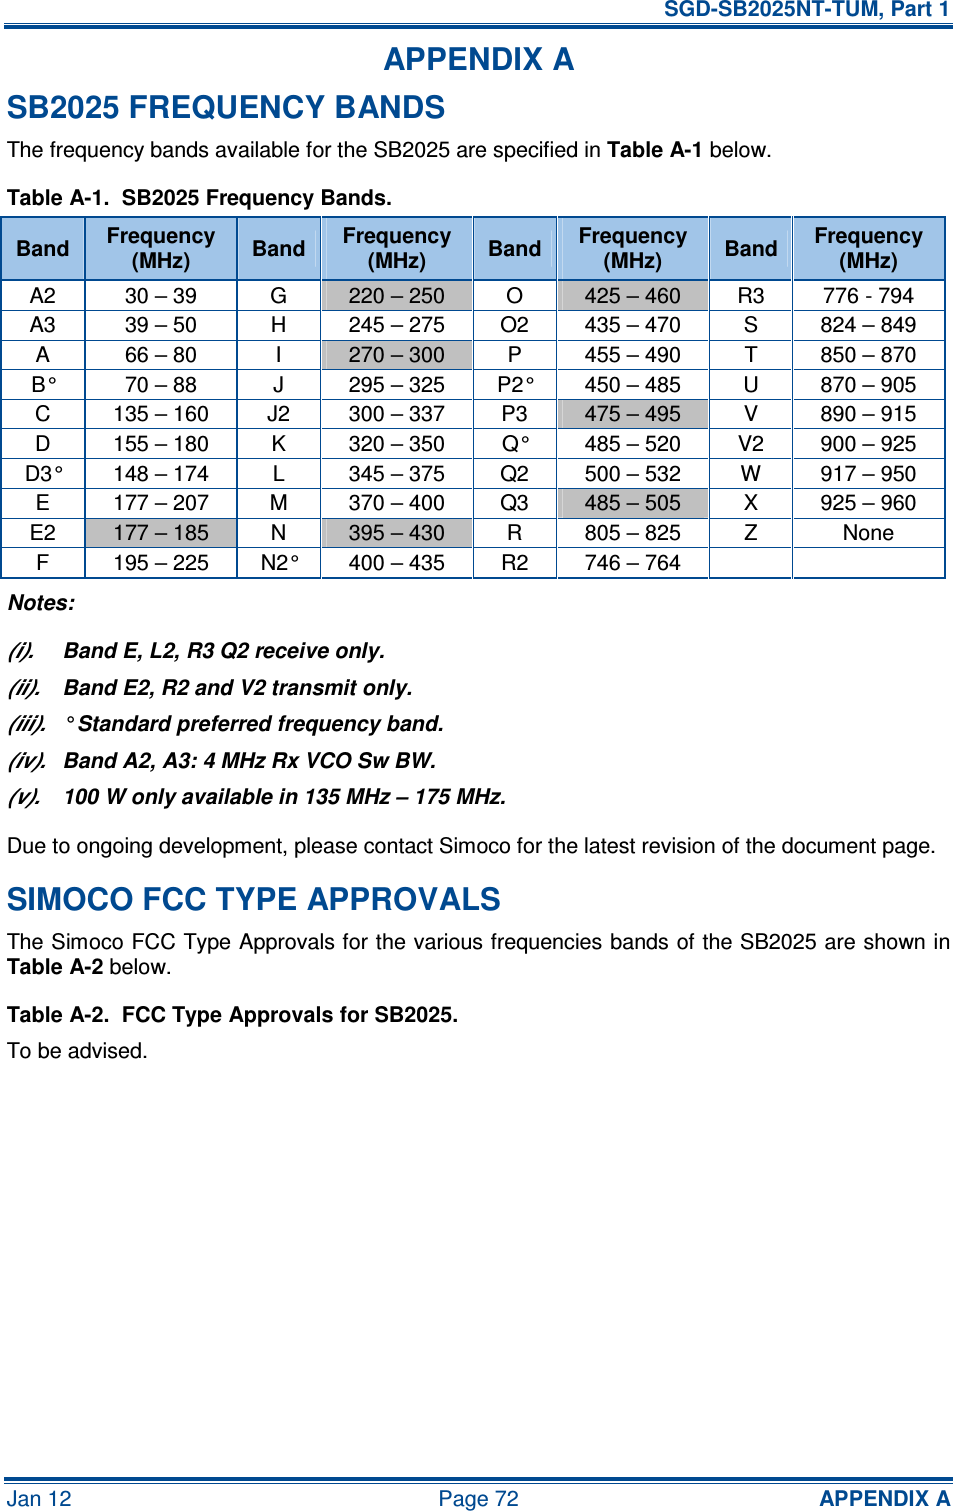   SGD-SB2025NT-TUM, Part 1 Jan 12  Page 72  APPENDIX A APPENDIX A SB2025 FREQUENCY BANDS The frequency bands available for the SB2025 are specified in Table A-1 below. Table A-1.  SB2025 Frequency Bands. Band  Frequency (MHz)  Band  Frequency (MHz)  Band  Frequency (MHz)  Band  Frequency (MHz) A2  30 – 39  G  220 – 250  O  425 – 460  R3  776 - 794 A3  39 – 50  H  245 – 275  O2  435 – 470  S  824 – 849 A  66 – 80  I  270 – 300  P  455 – 490  T  850 – 870 B°  70 – 88  J  295 – 325  P2°  450 – 485  U  870 – 905 C  135 – 160  J2  300 – 337  P3  475 – 495  V  890 – 915 D  155 – 180  K  320 – 350  Q°  485 – 520  V2  900 – 925 D3°  148 – 174  L  345 – 375  Q2  500 – 532  W  917 – 950 E  177 – 207  M  370 – 400  Q3  485 – 505  X  925 – 960 E2  177 – 185  N  395 – 430  R  805 – 825  Z  None F  195 – 225  N2°  400 – 435  R2  746 – 764     Notes: (i).  Band E, L2, R3 Q2 receive only. (ii).  Band E2, R2 and V2 transmit only. (iii).  ° Standard preferred frequency band. (iv).  Band A2, A3: 4 MHz Rx VCO Sw BW. (v).  100 W only available in 135 MHz – 175 MHz. Due to ongoing development, please contact Simoco for the latest revision of the document page. SIMOCO FCC TYPE APPROVALS The Simoco FCC Type Approvals for the various frequencies bands of the SB2025 are shown in Table A-2 below. Table A-2.  FCC Type Approvals for SB2025. To be advised.   